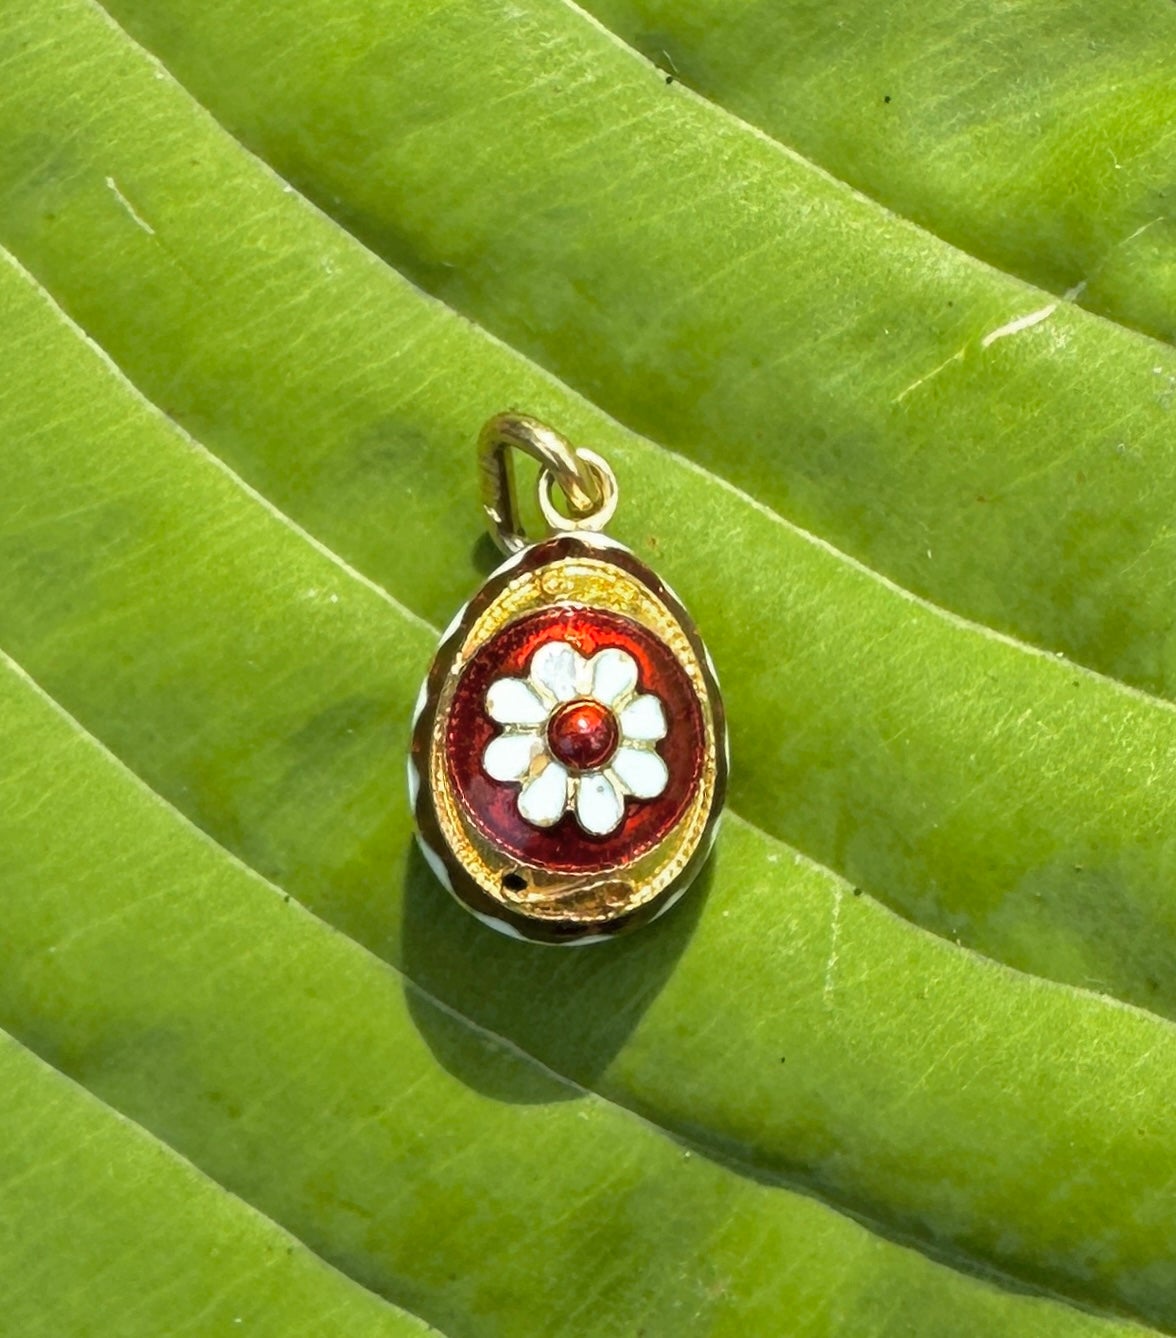 This is an extraordinary antique Enamel Easter Egg 18 Karat Gold Pendant or Charm.  The fabulous egg has beautiful red and white enamel designs with a flower motif in the center and a diamond design border around the egg.  The egg is further adorned